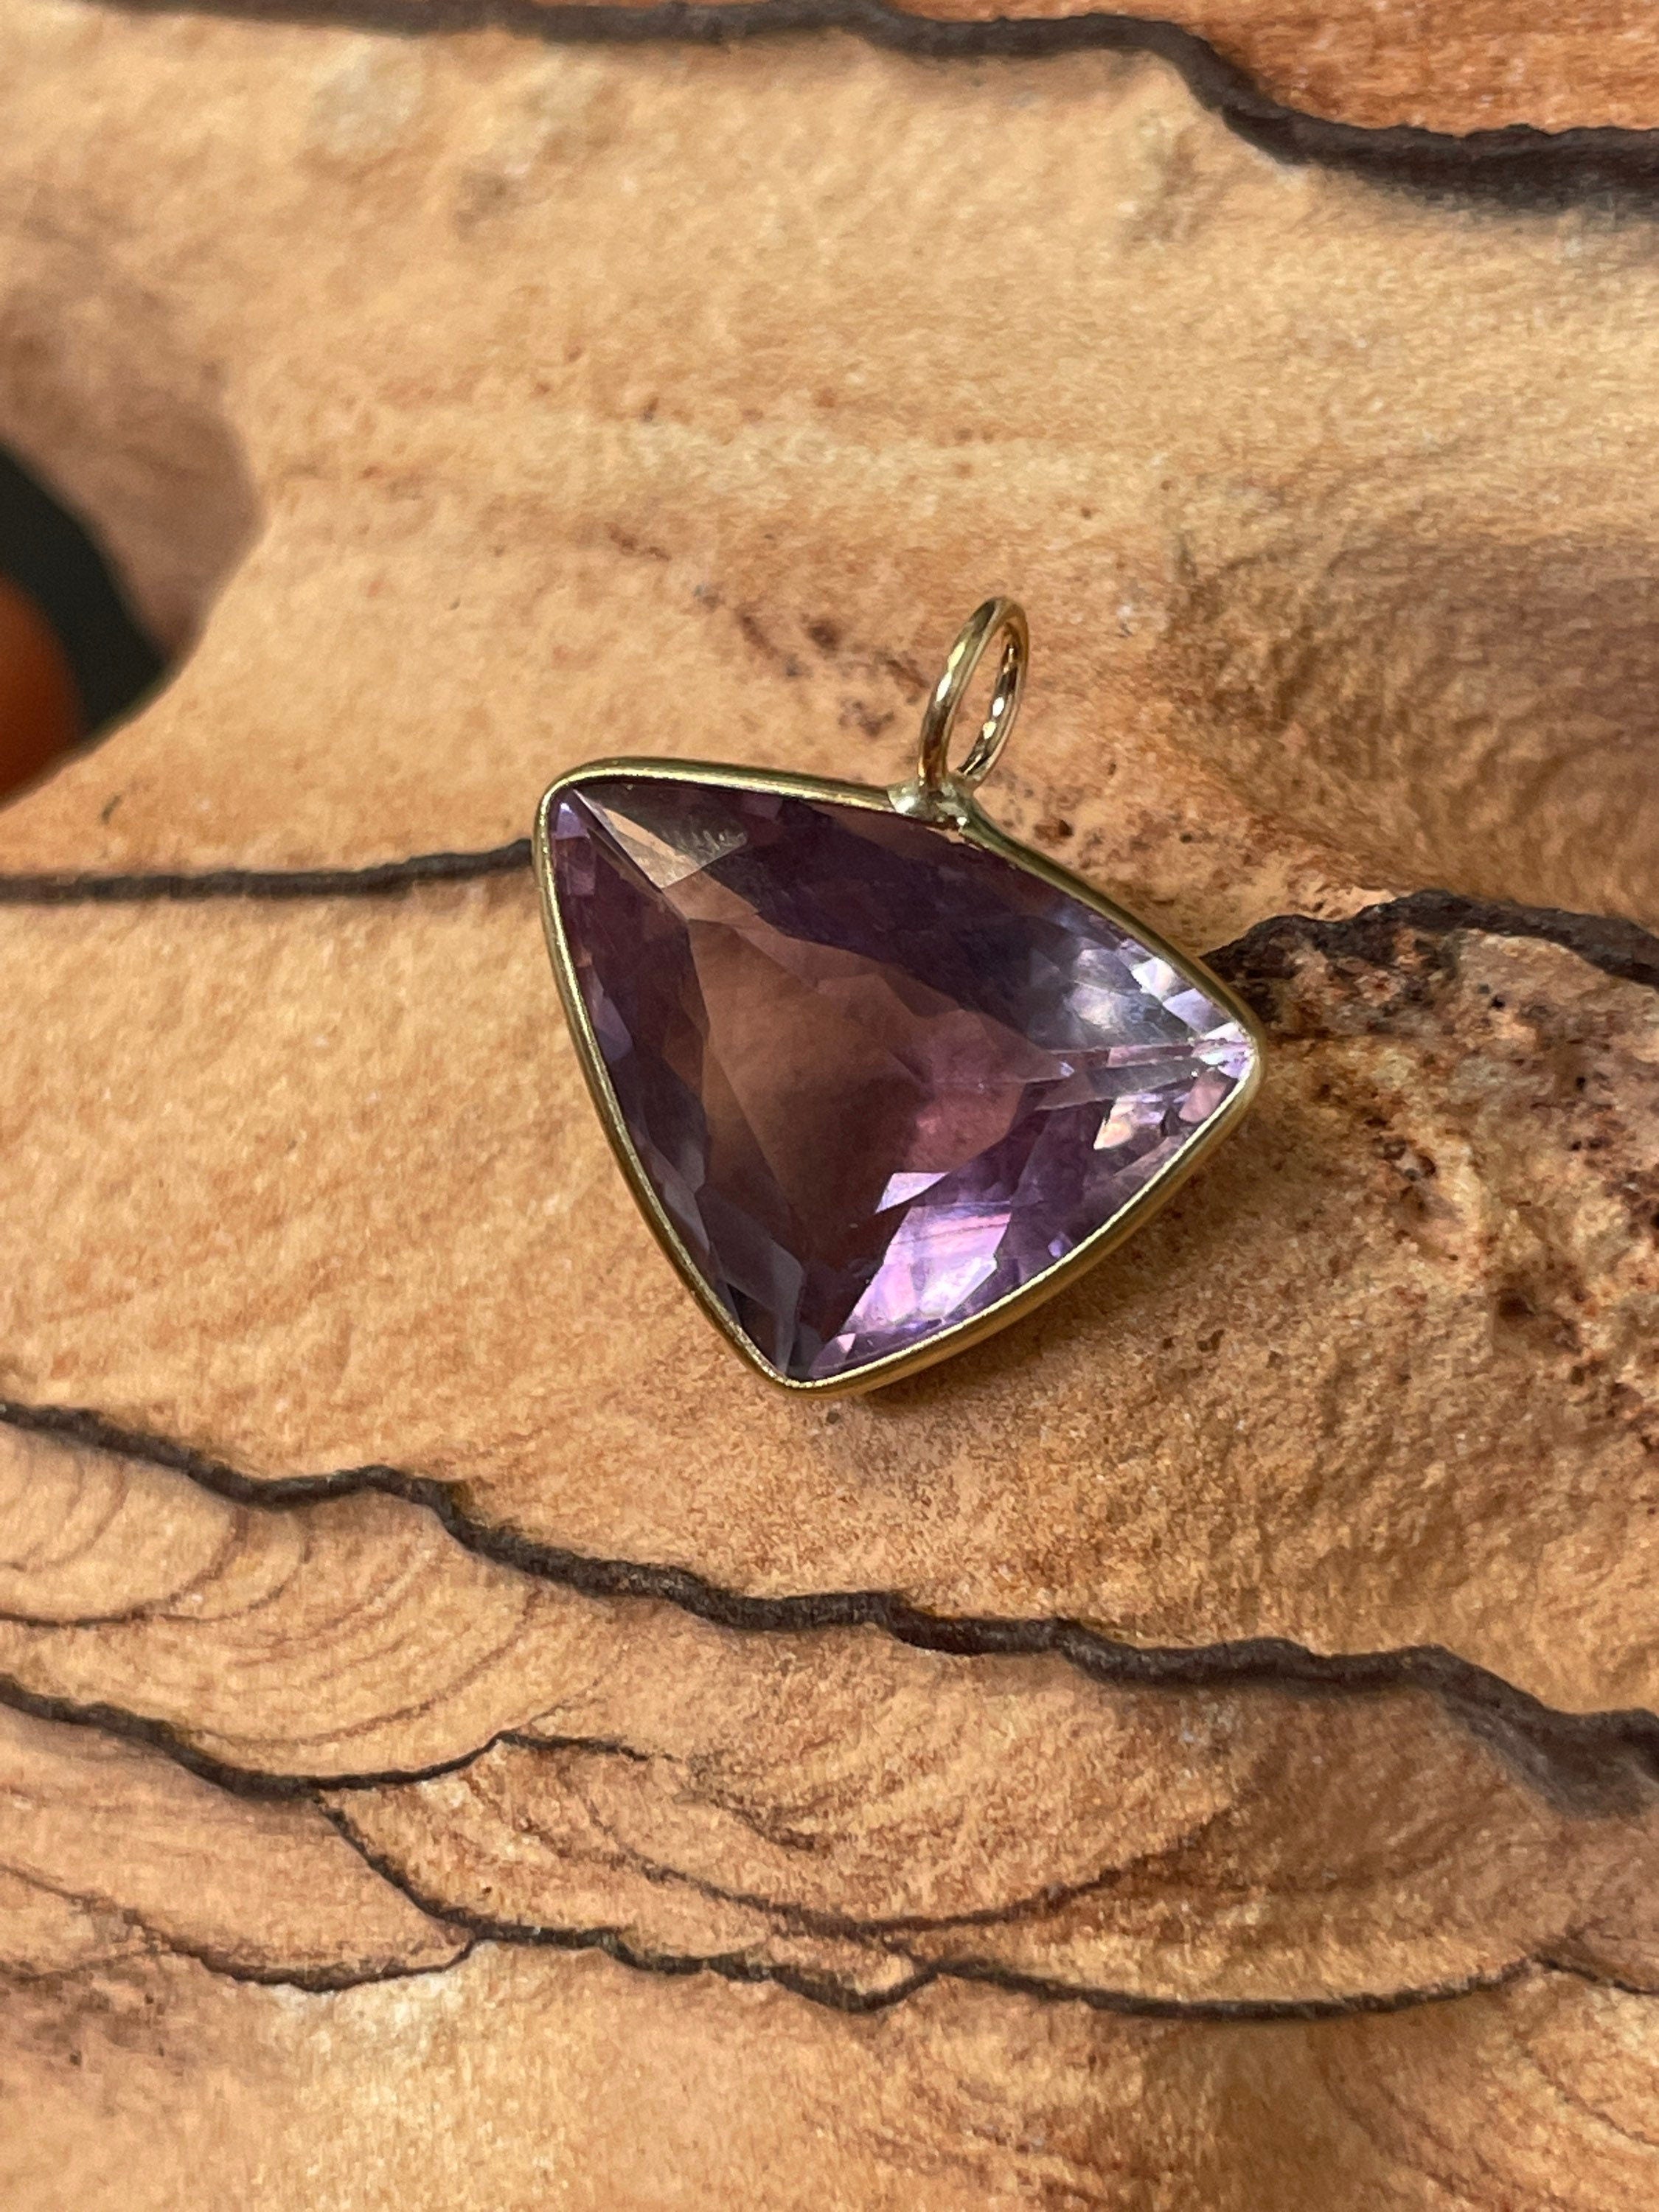 Unique 6CT Triangular Natural  Purple Amethyst Gem Charm in Solid 14K Yellow Gold 18x16mm